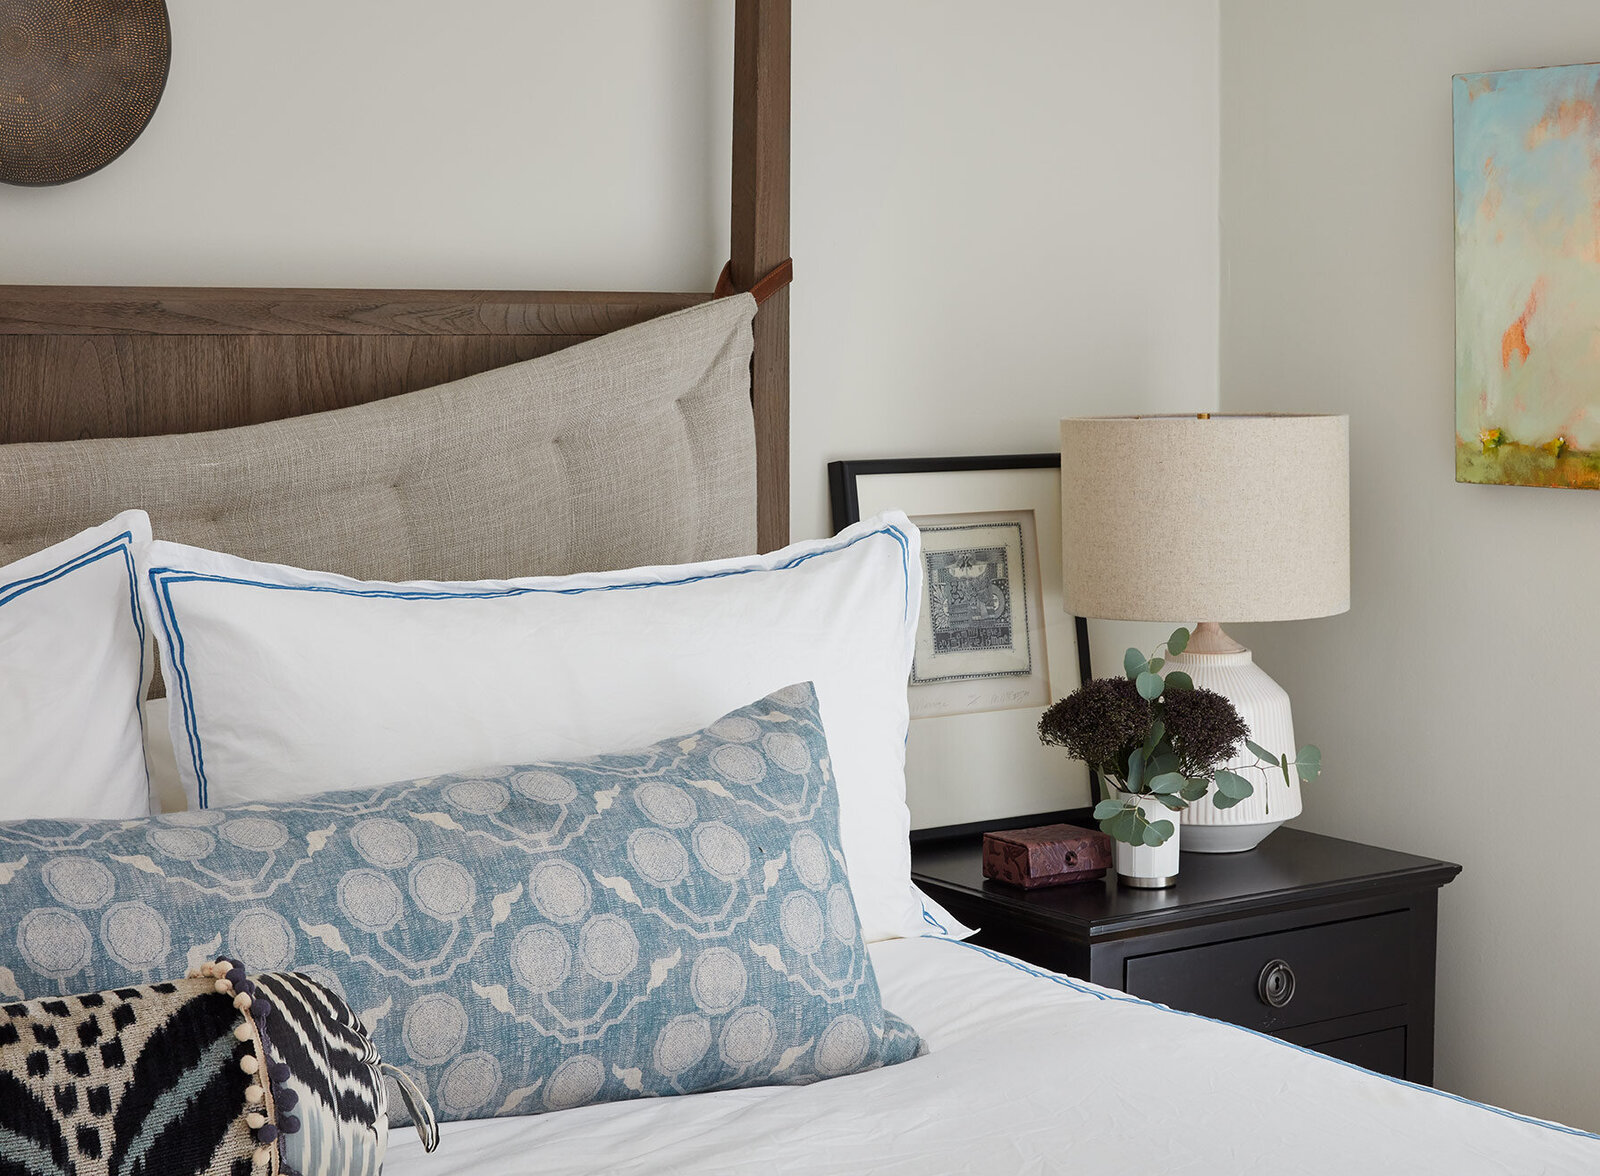 Canopy bed with white comforter and blue pillows and a dark wooden nightstand